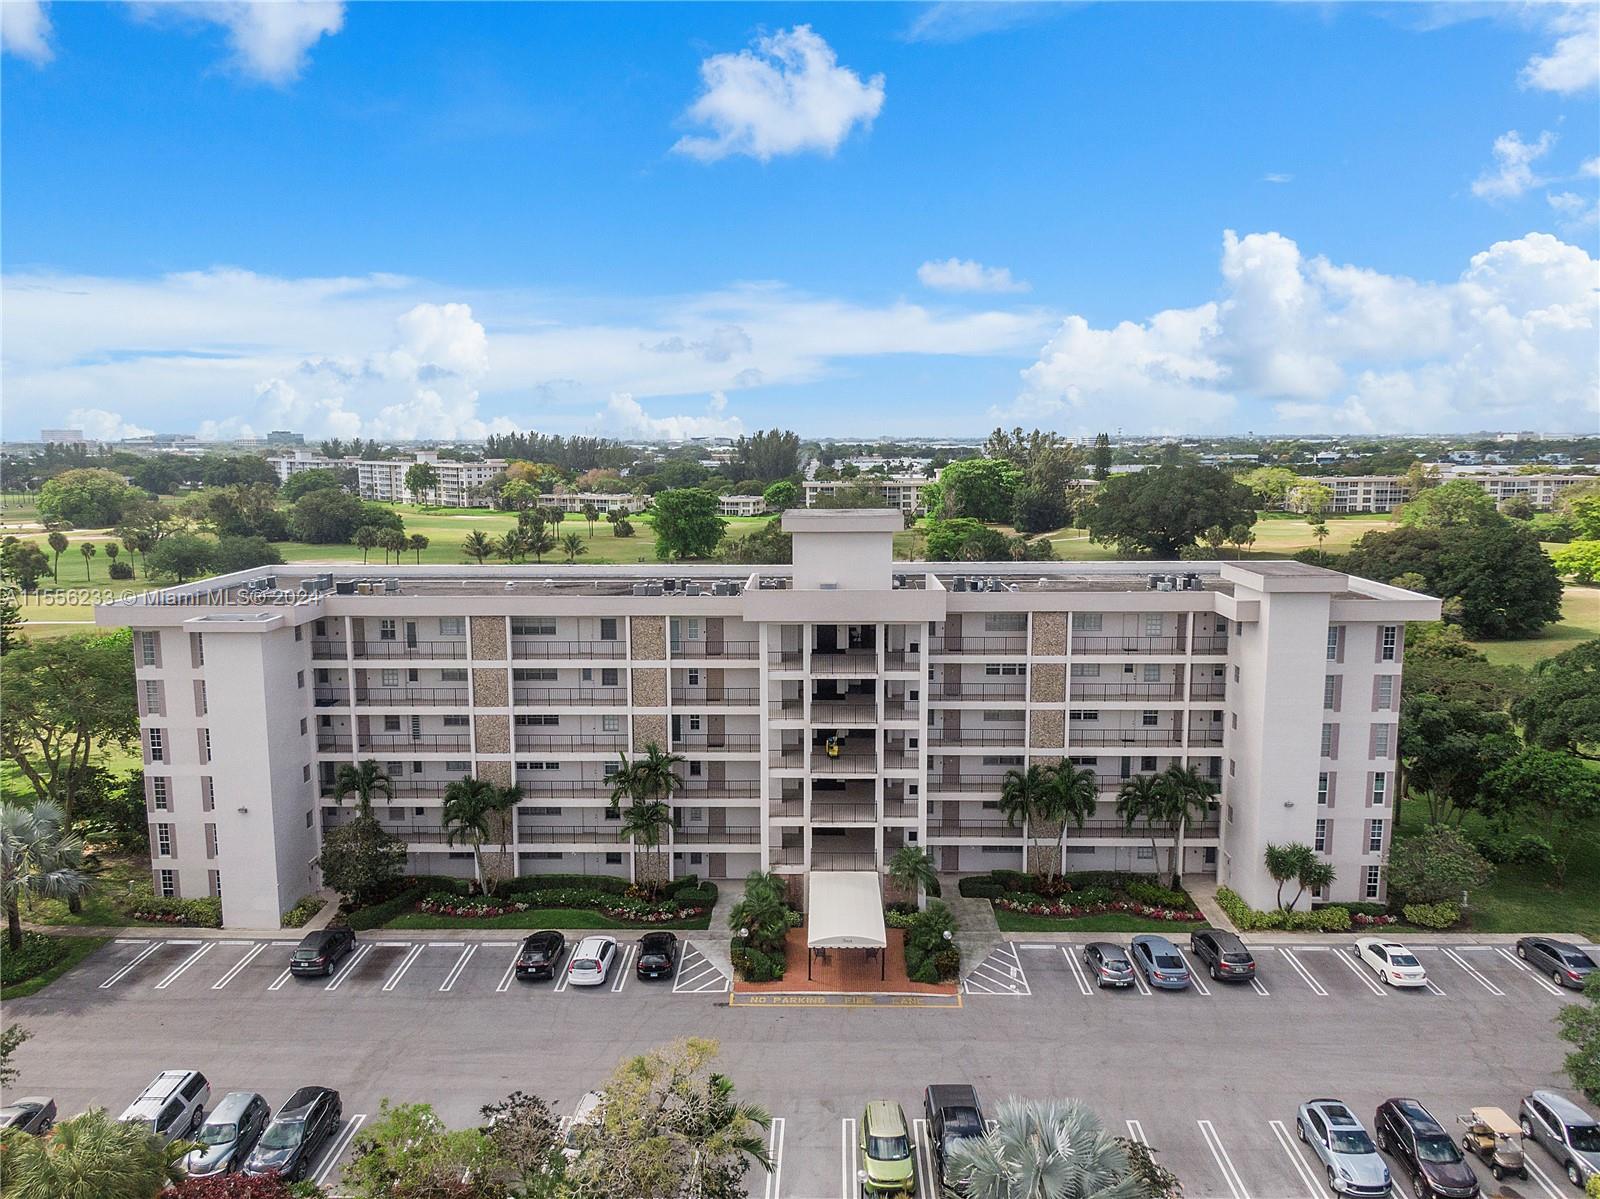 3000 N Palm Aire Dr 403, Pompano Beach, Broward County, Florida - 2 Bedrooms  
2 Bathrooms - 